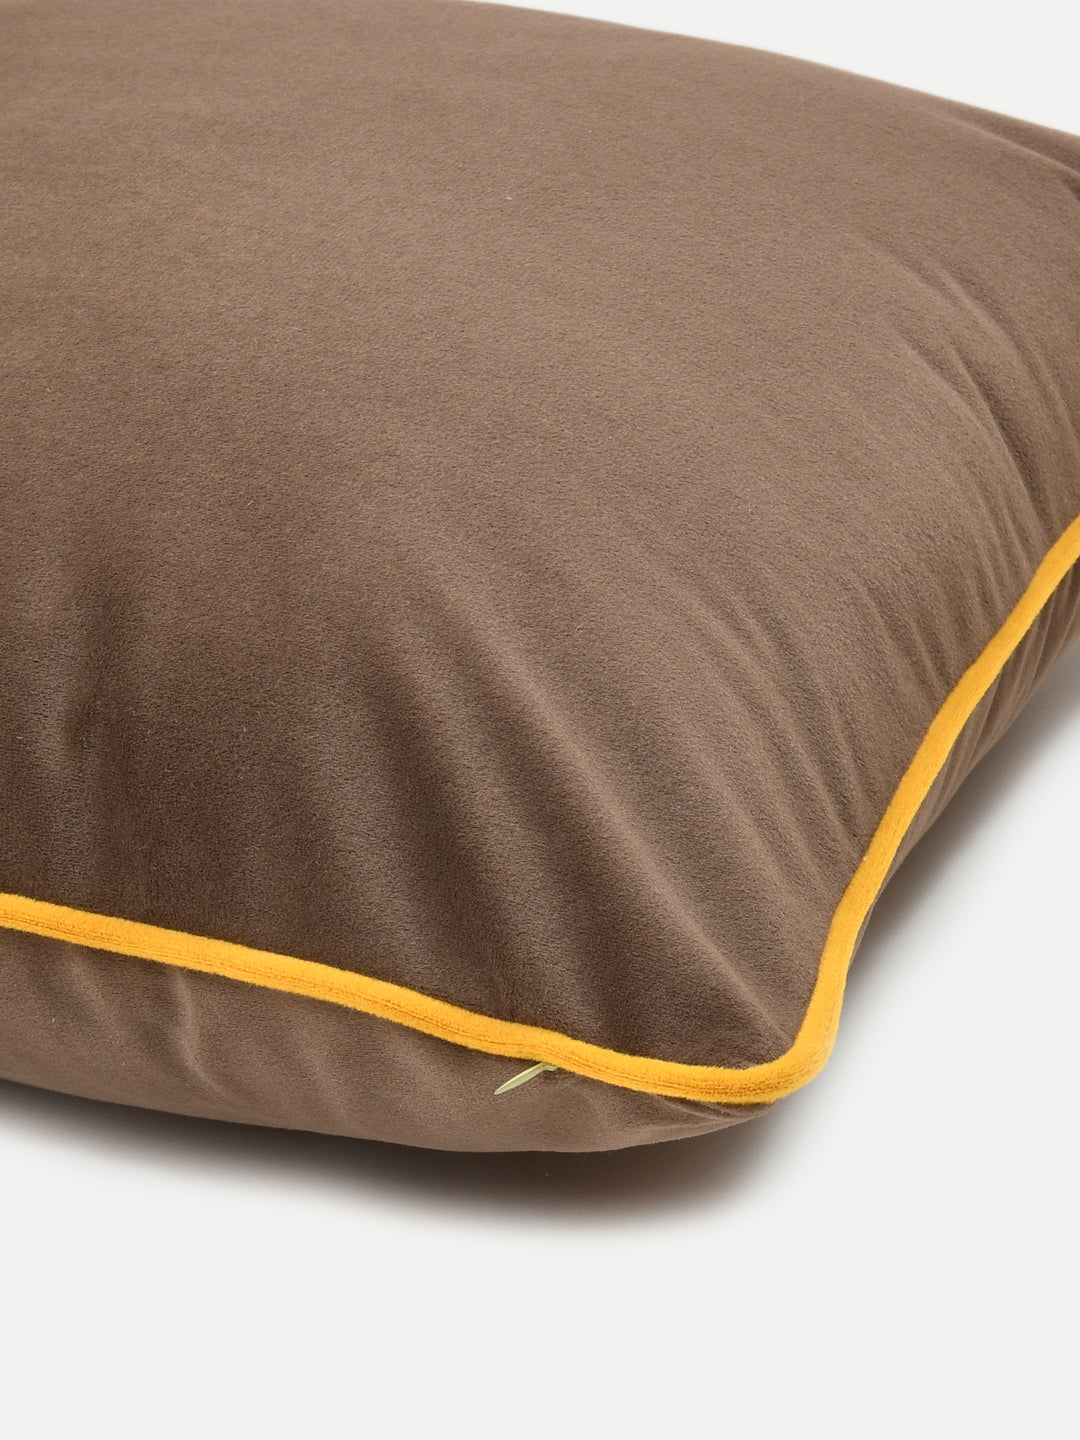 Velvet Cushion Covers; Set of 5; Caramel Brown With Yellow Piping